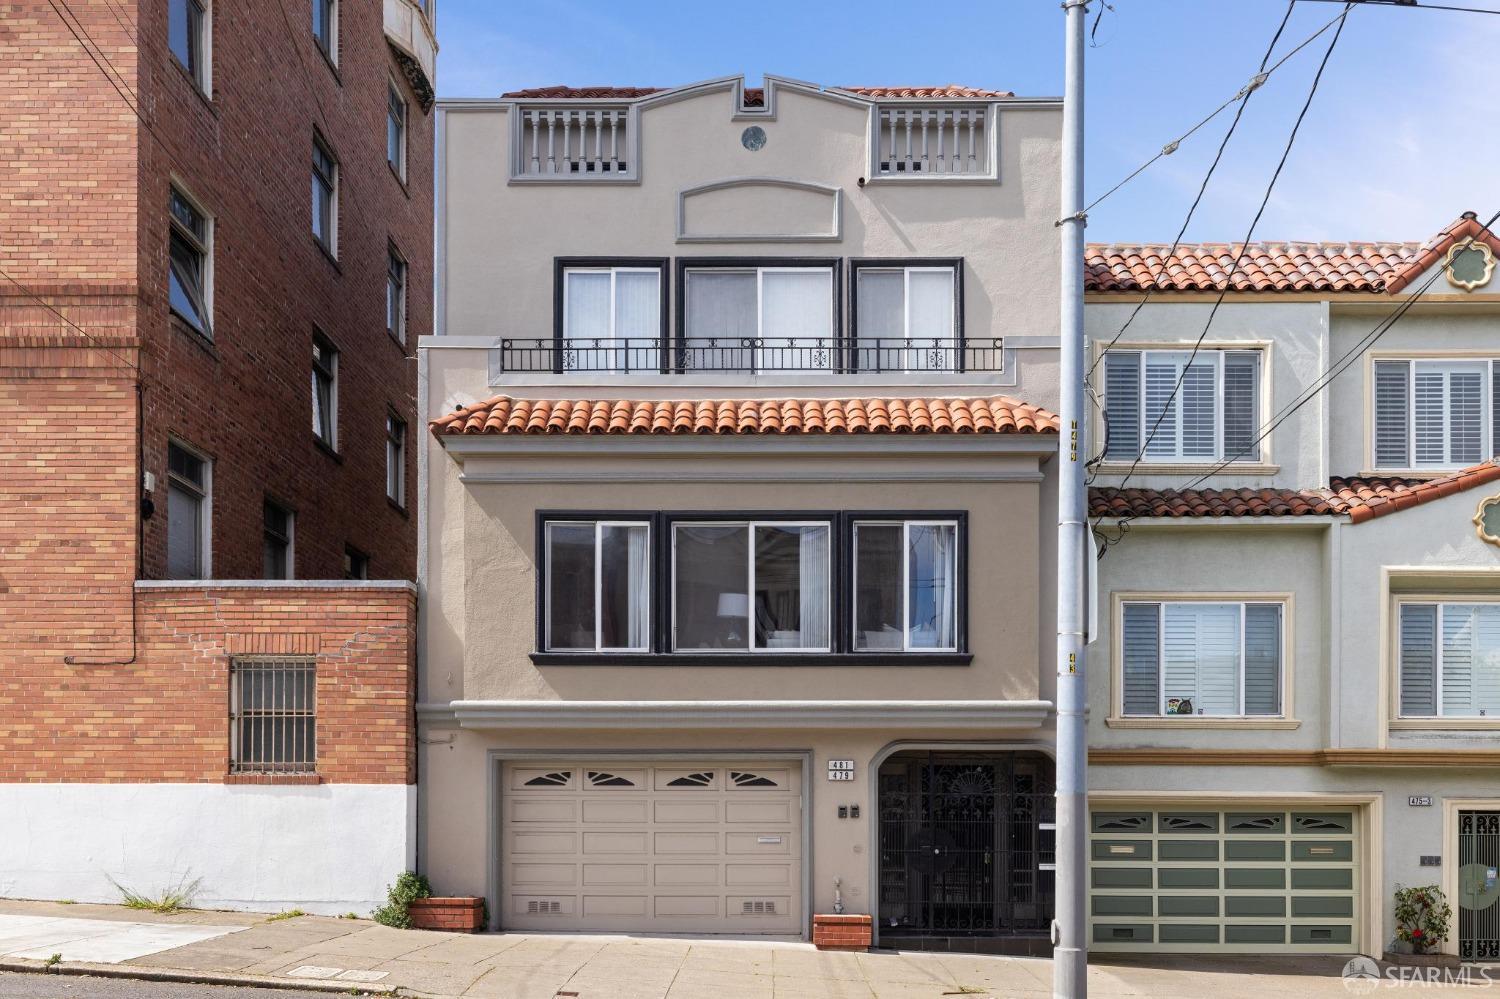 Photo of 479-481 32nd Ave in San Francisco, CA